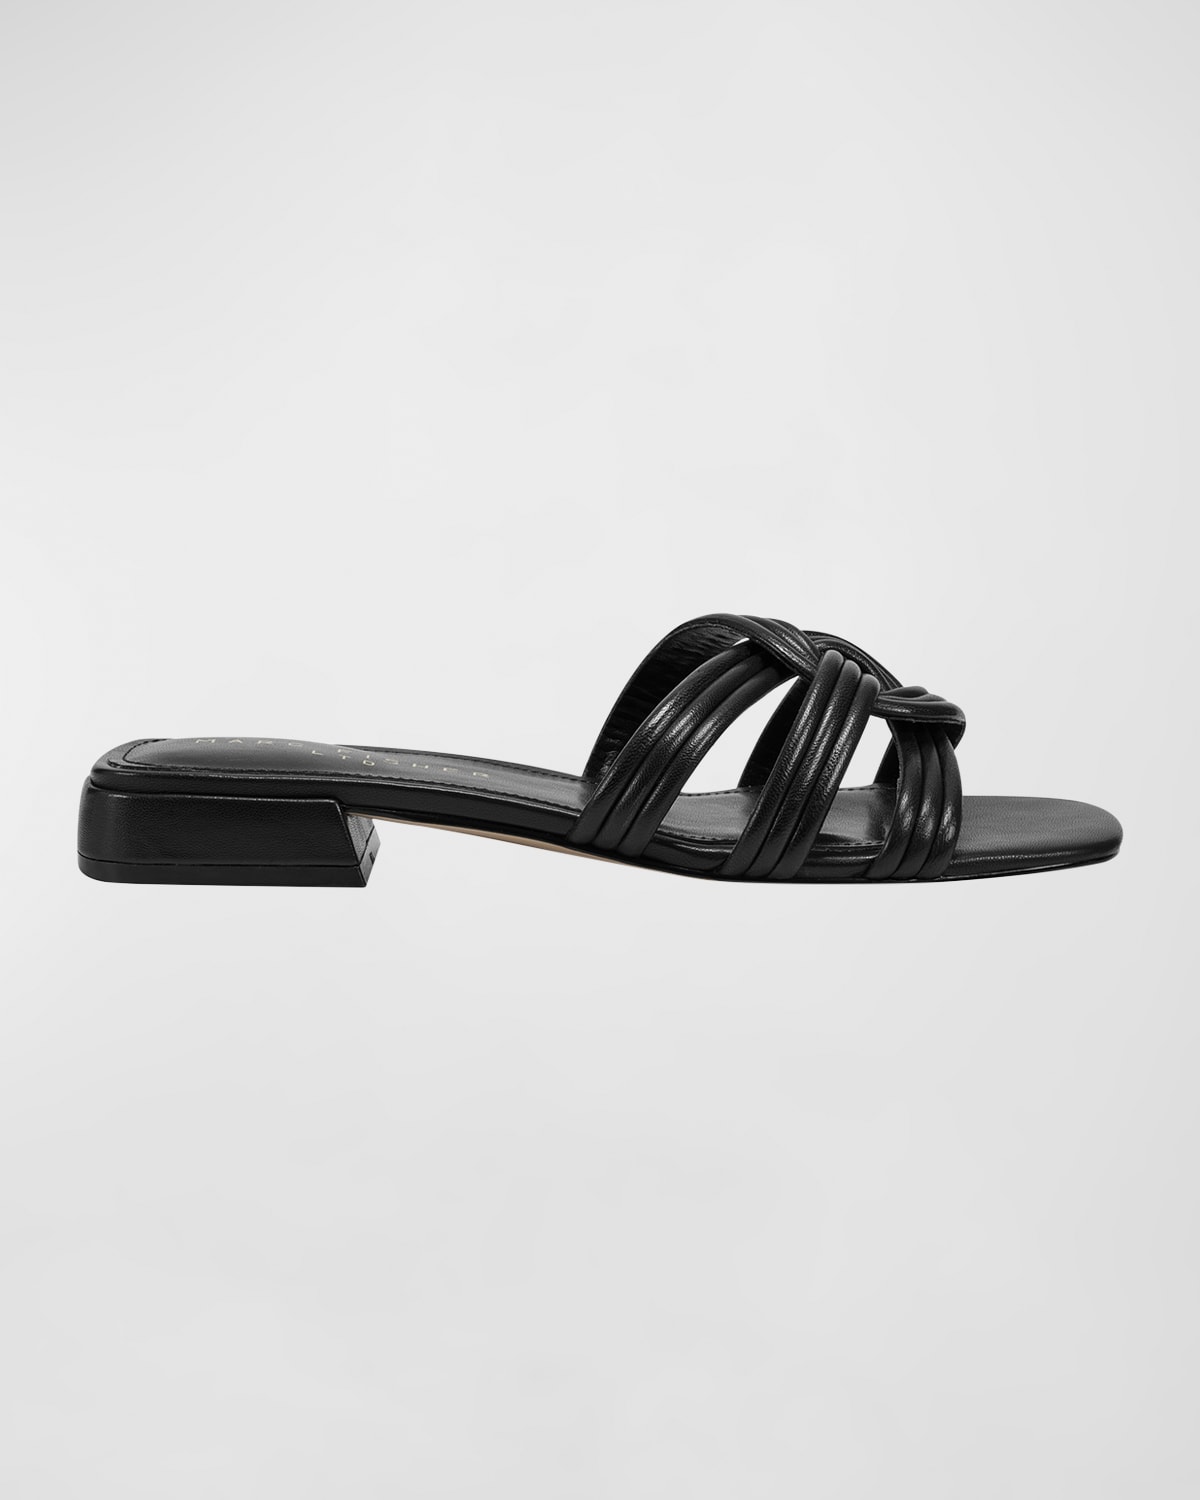 Woven Leather Flat Slide Sandals